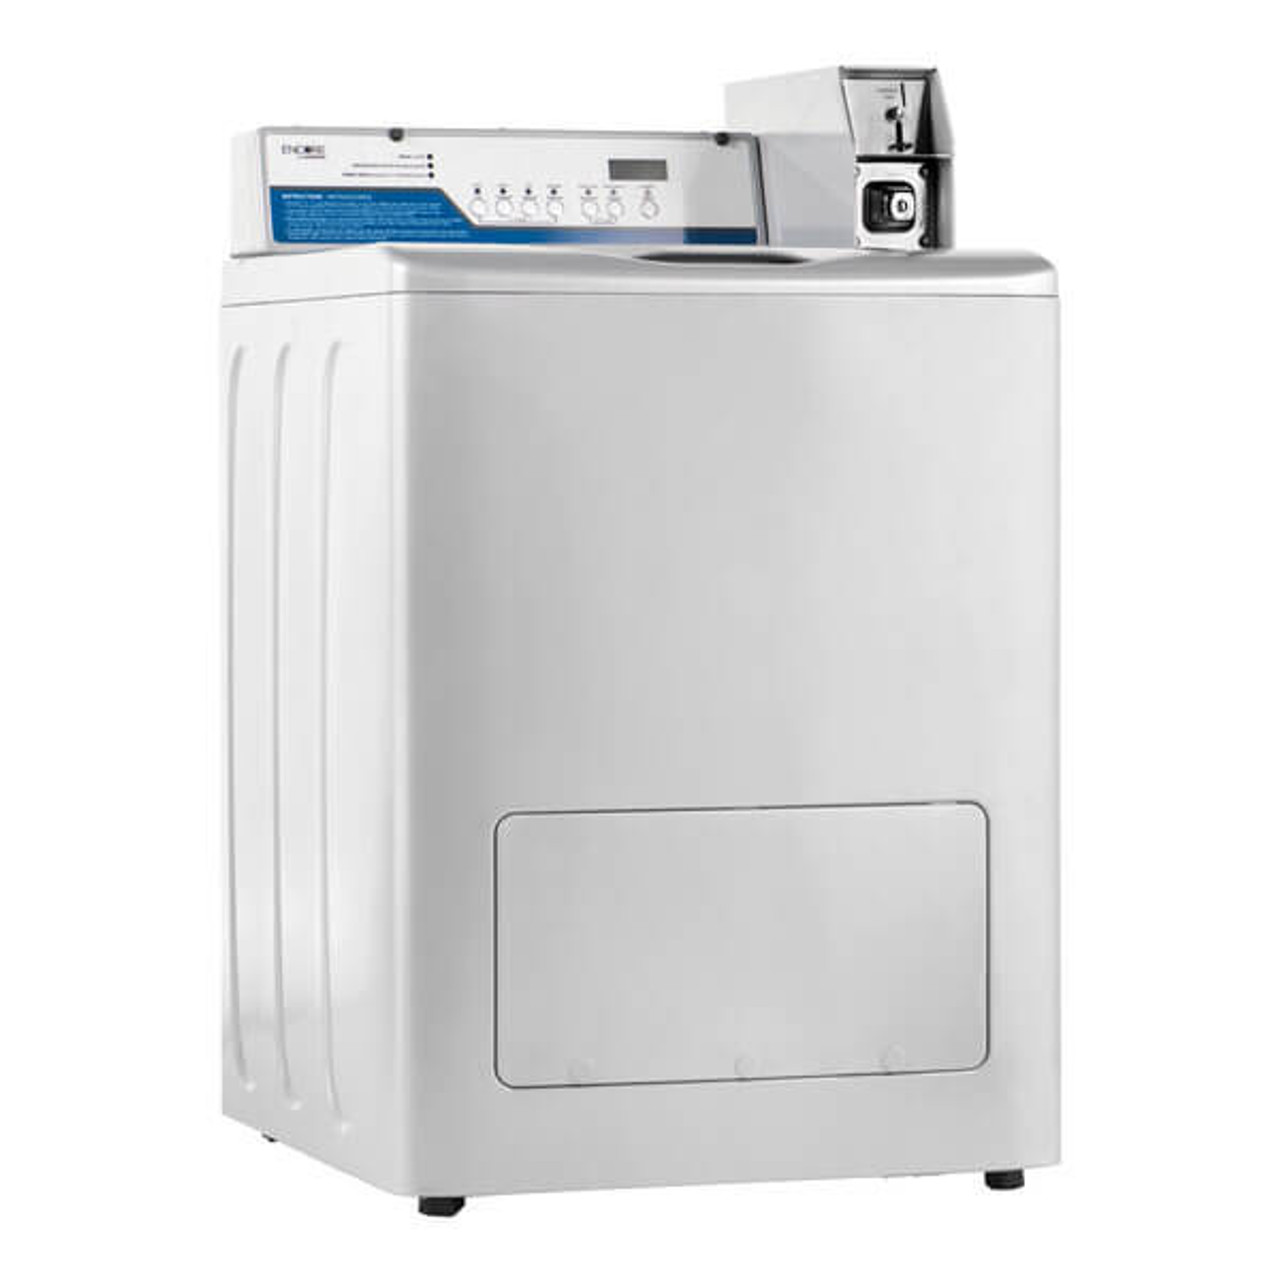 Encore Pro 2.9 cu. ft. 27" Top Load Commercial Washer - Coin Operated